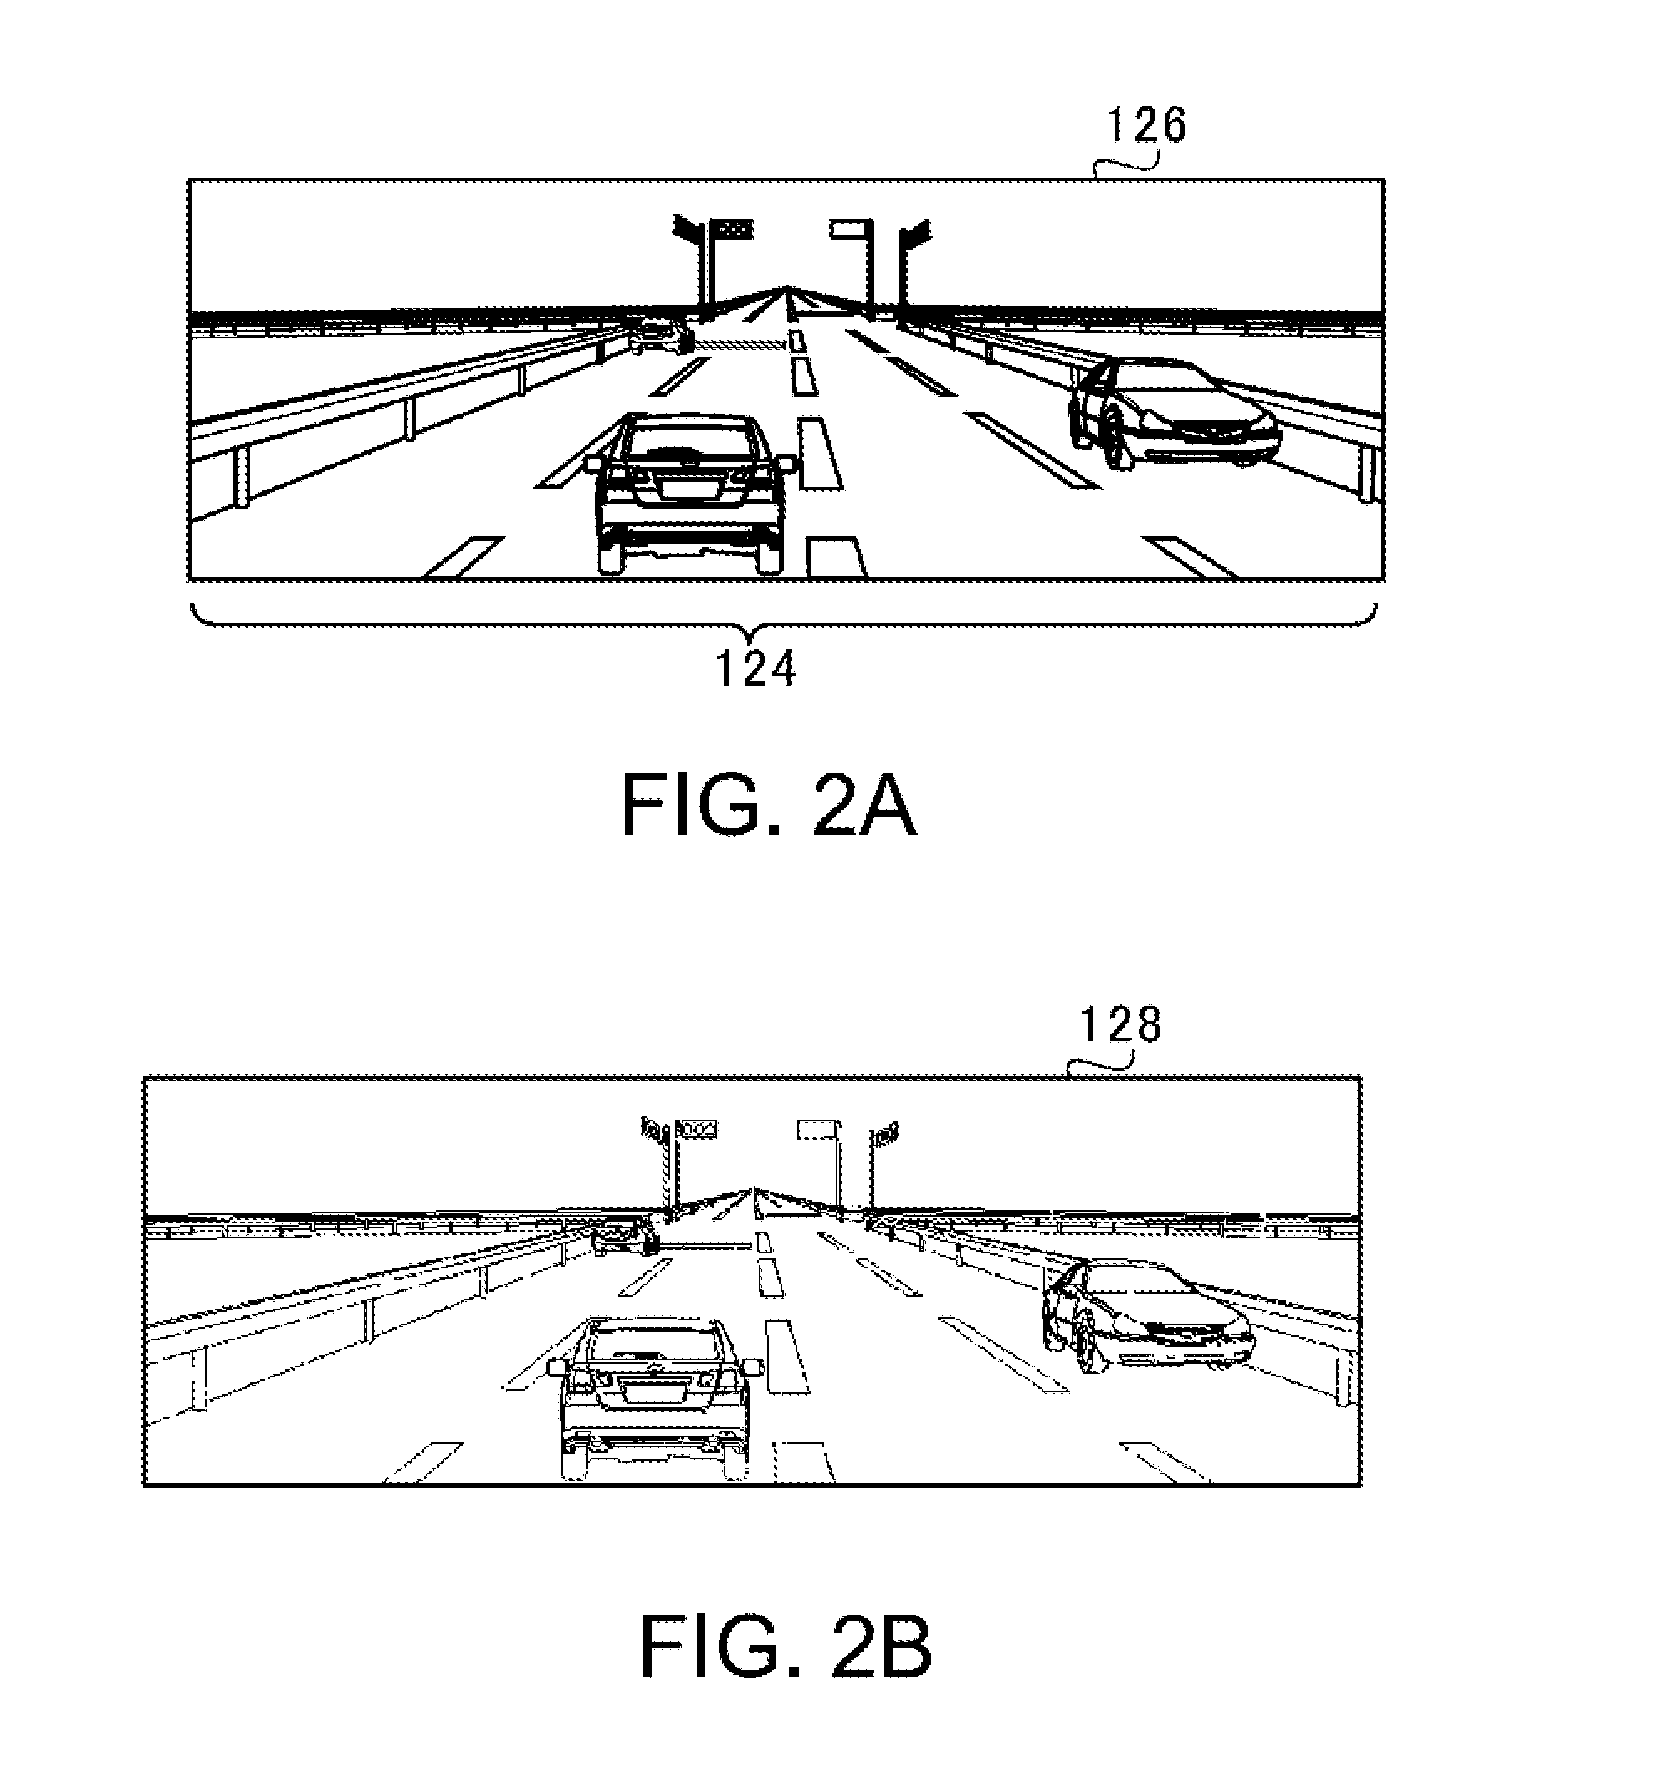 Vehicle exterior environment recognition device